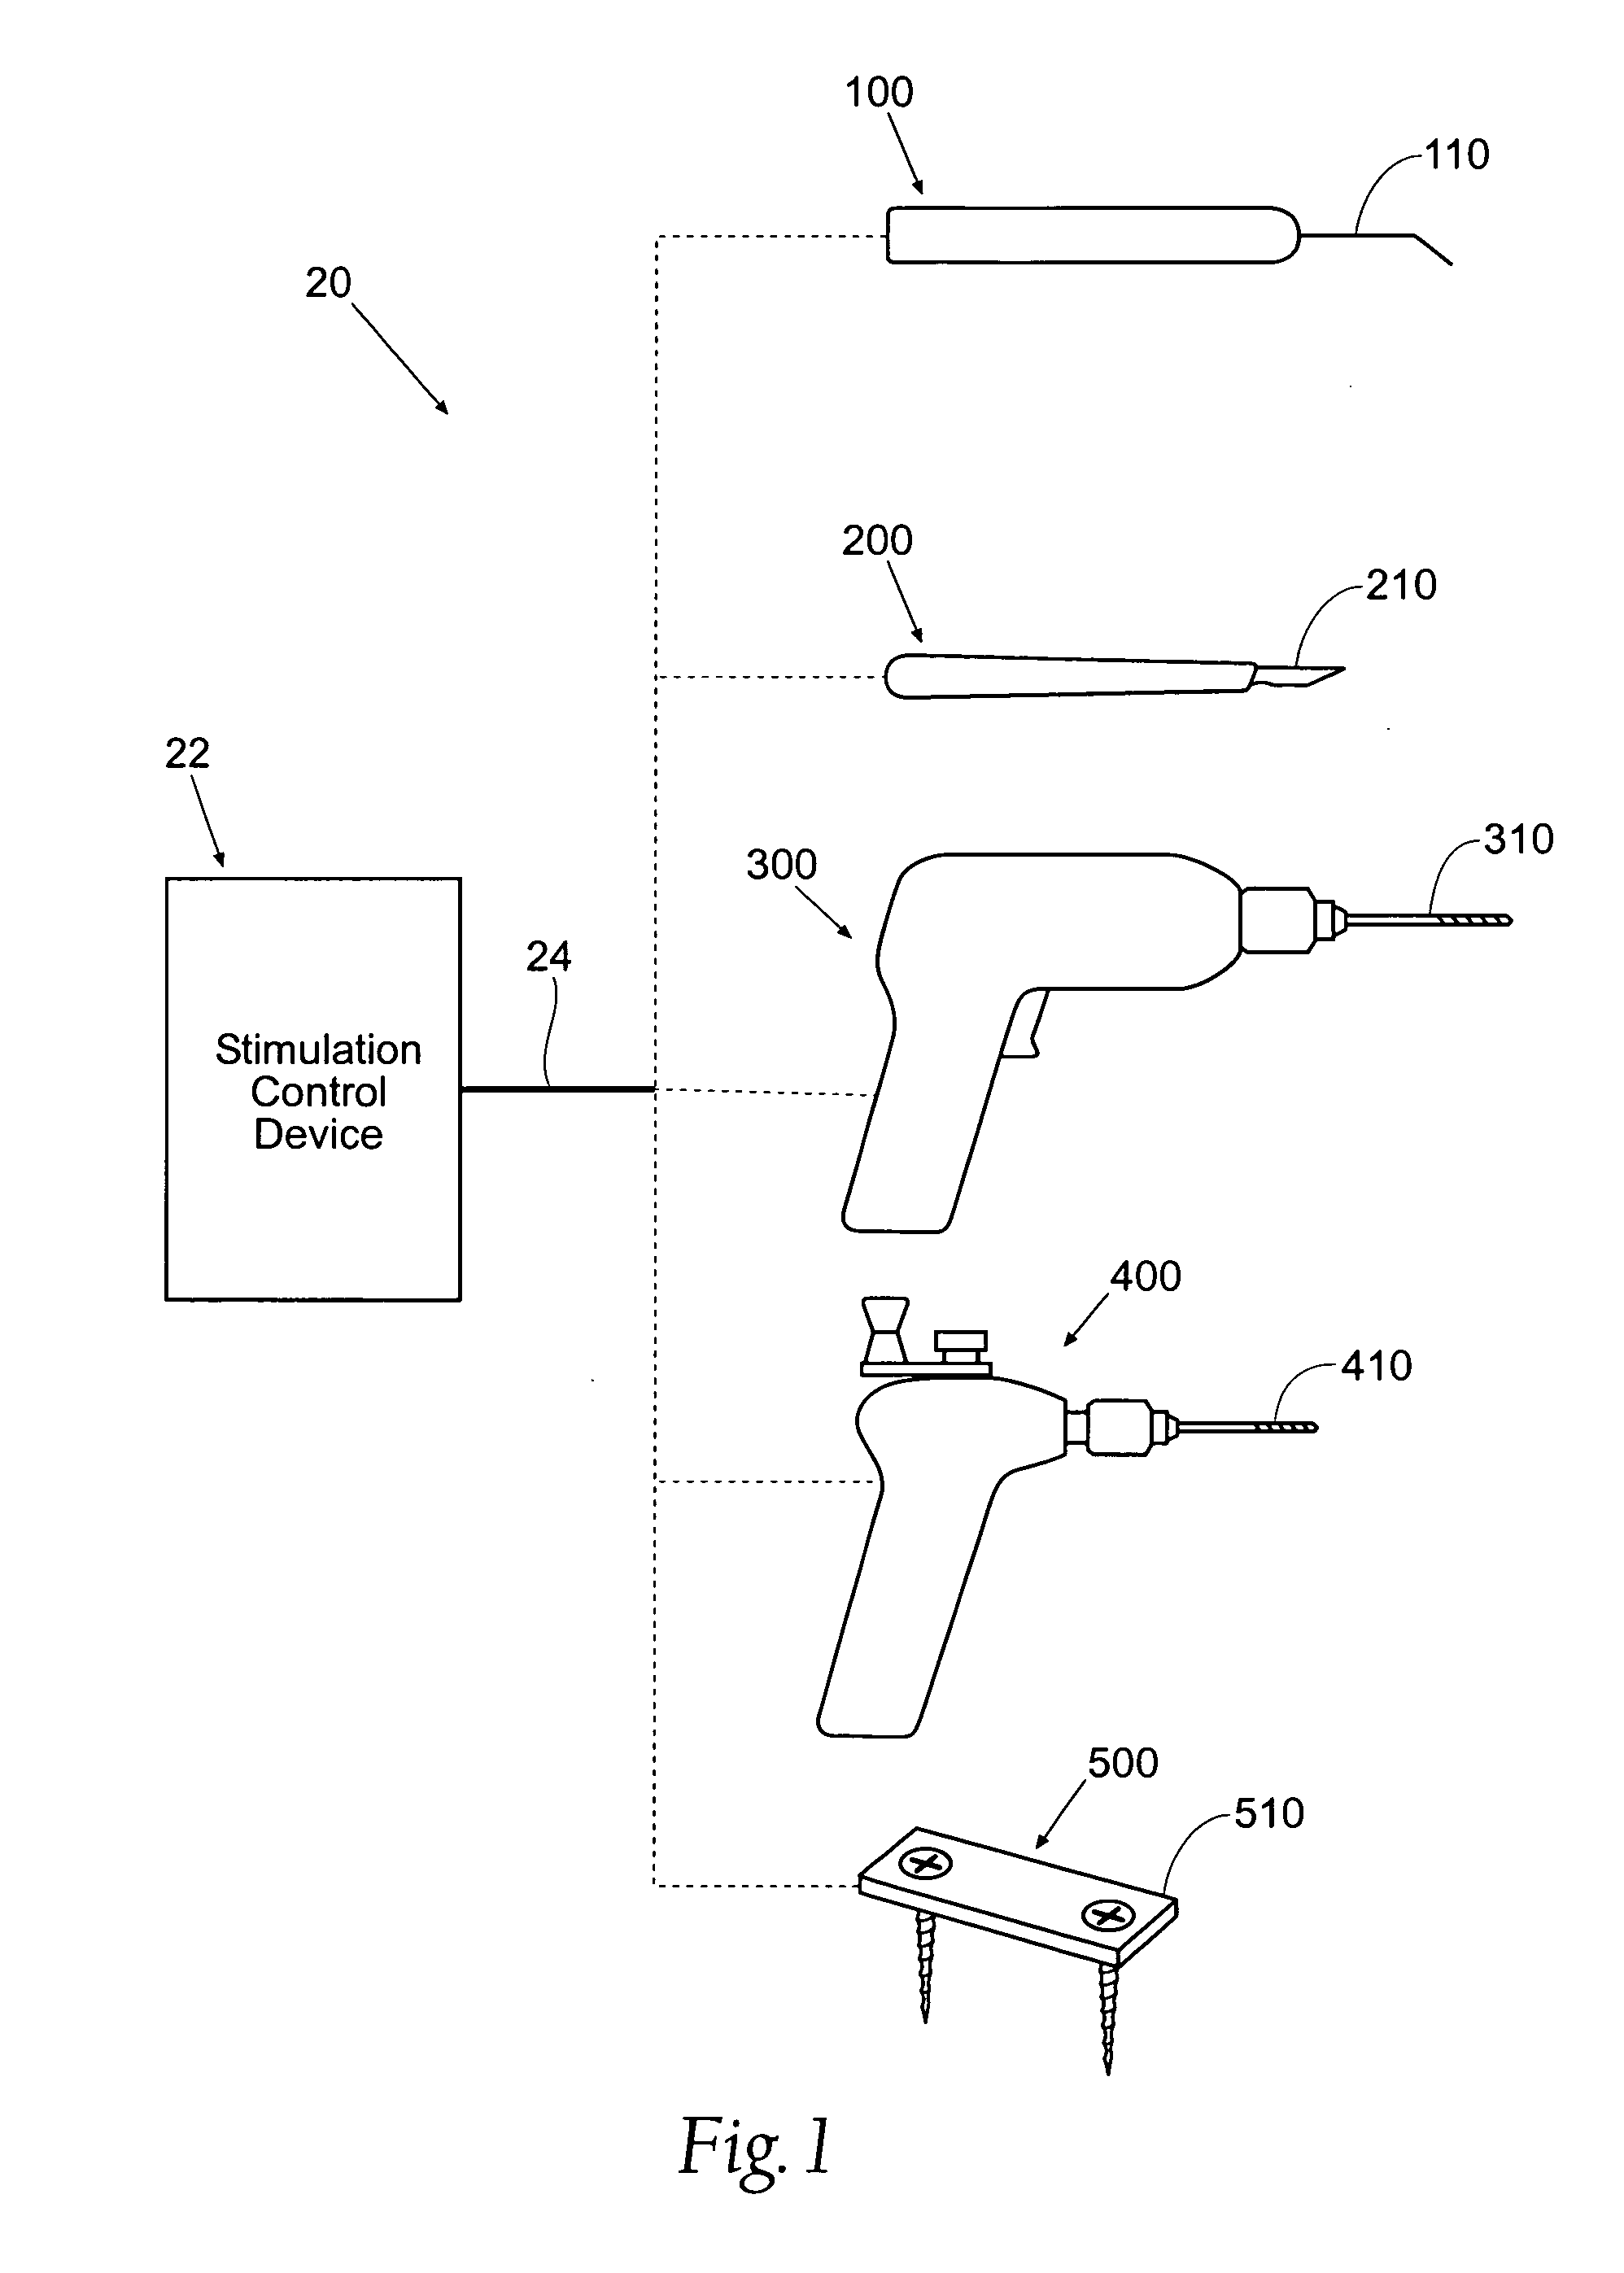 Systems and methods for intra-operative stimulation within a surgical field